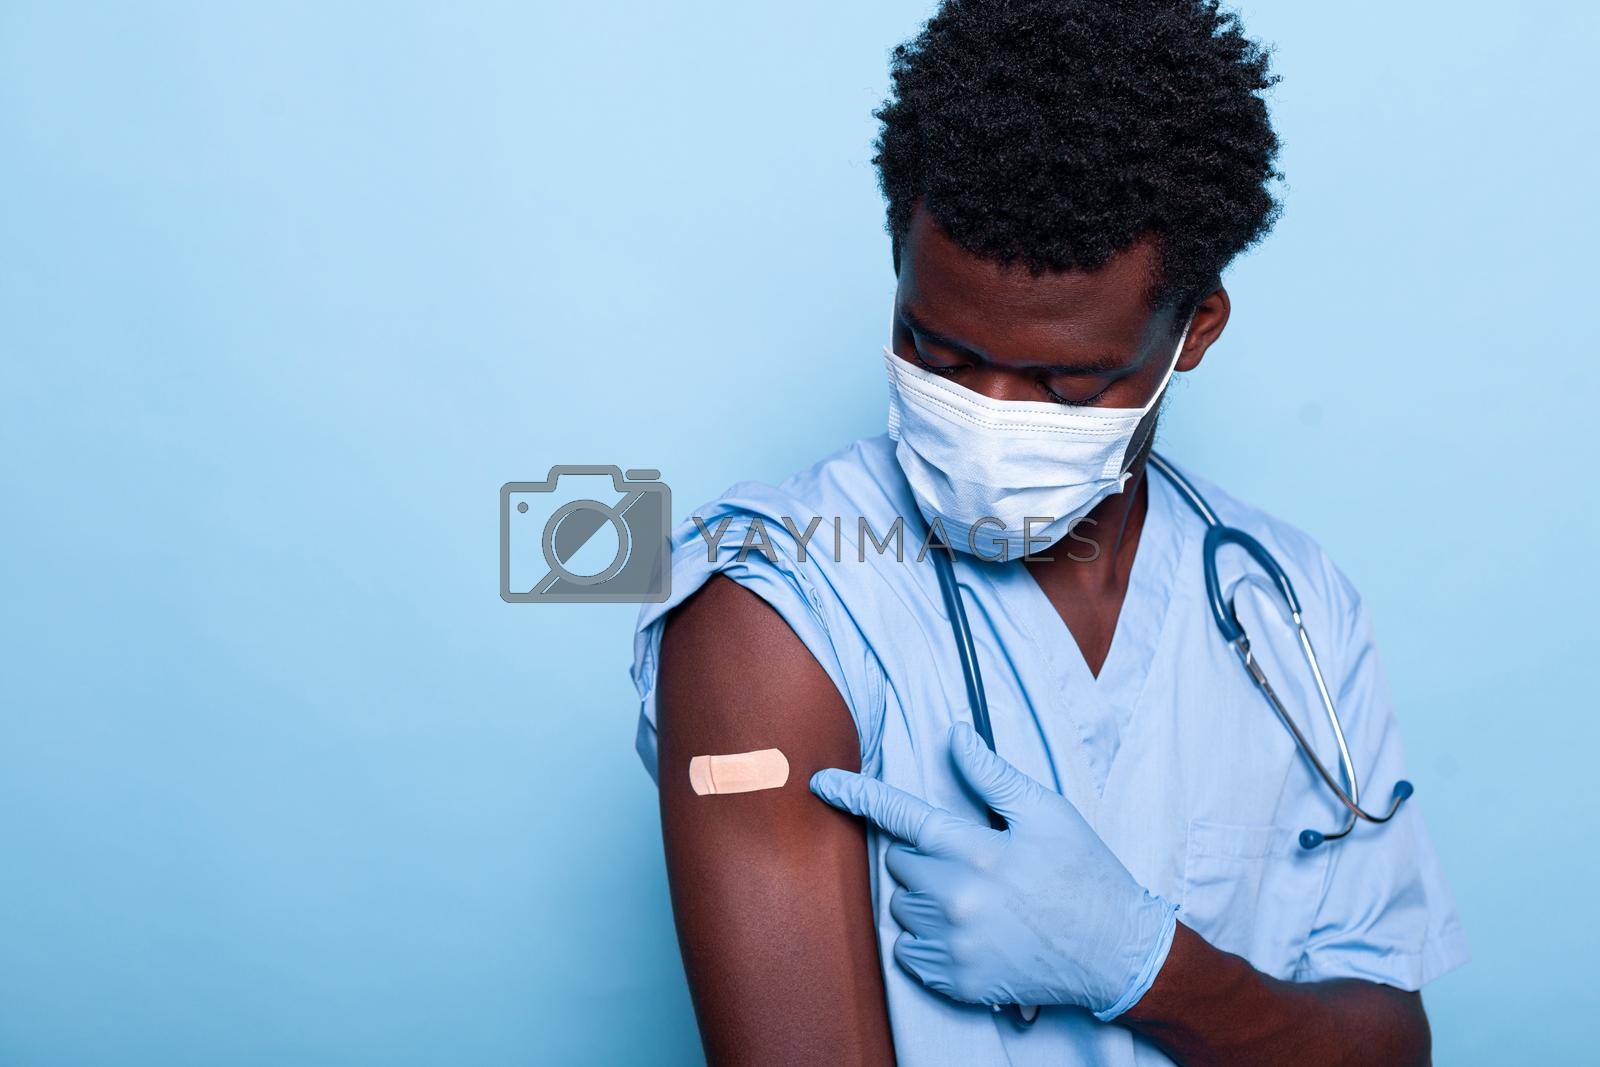 Healthcare specialist having adhesive bandage after vaccination against coronavirus. Vaccinated nurse with uniform and face mask pointing at vaccine shot patch for immunity and prevention